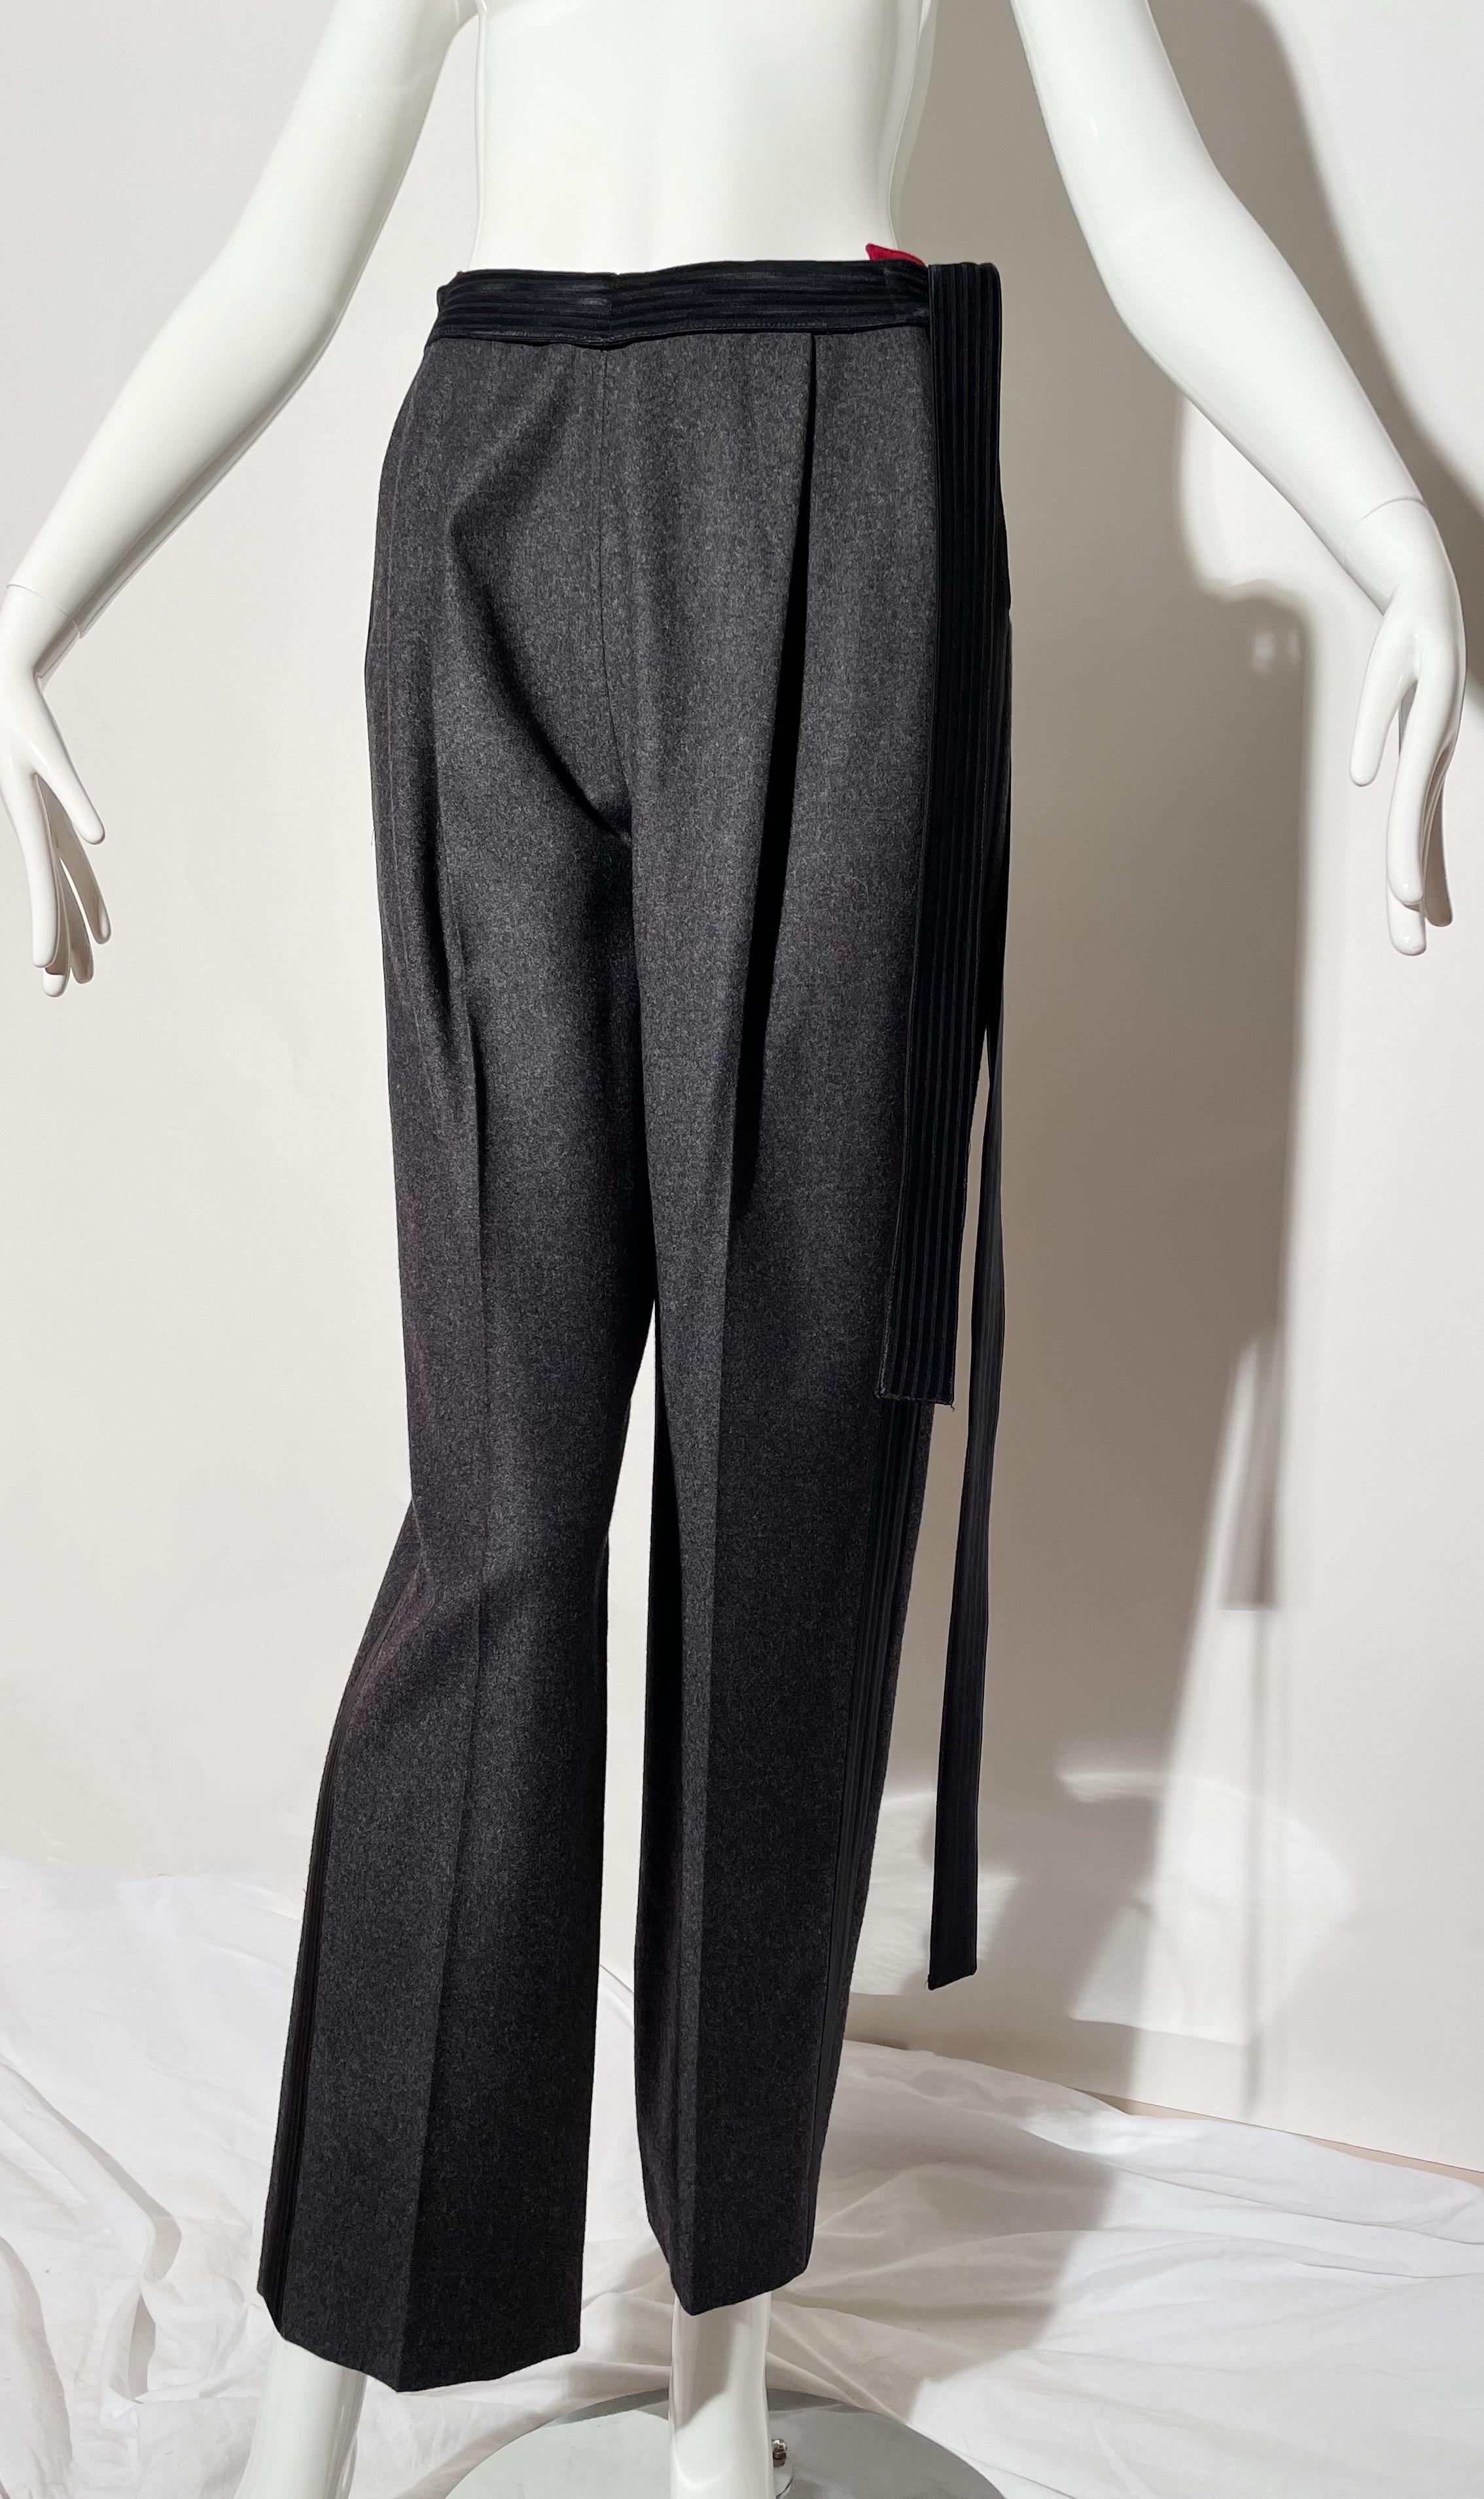 Grey trouser. Tuxedo stripe on side. Multiuse side straps. Wool. Made in Italy. 
*Condition: excellent vintage condition. No visible flaws.

Measurements Taken Laying Flat (inches)—
Waist: 26 in.
Hip: 34 in.
Rise: 13 in.
Inseam:  28.5 in.
Marked